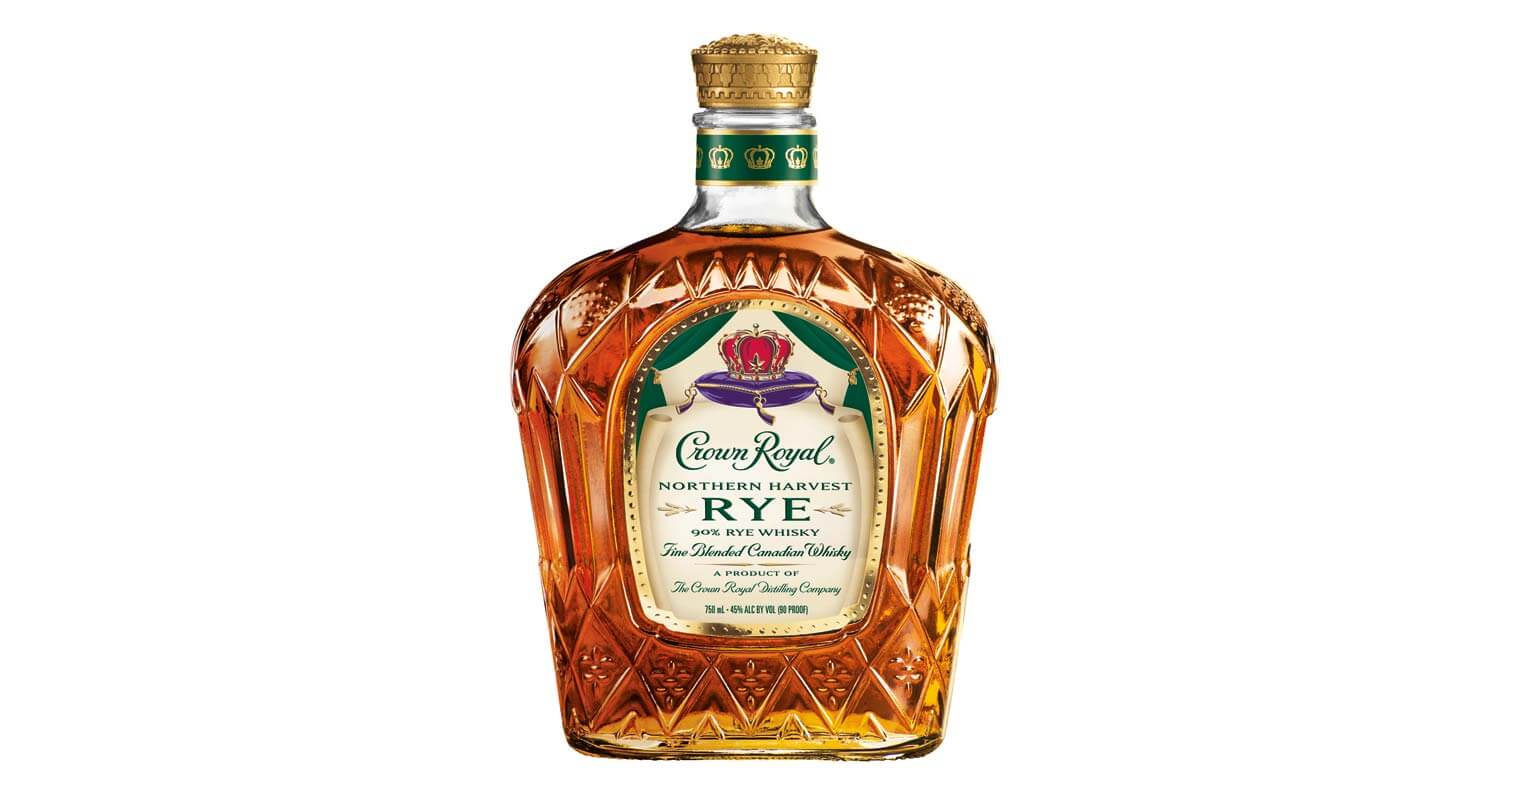 Crown Royal Northern Harvest Rye Named Canadian Whisky of the Year